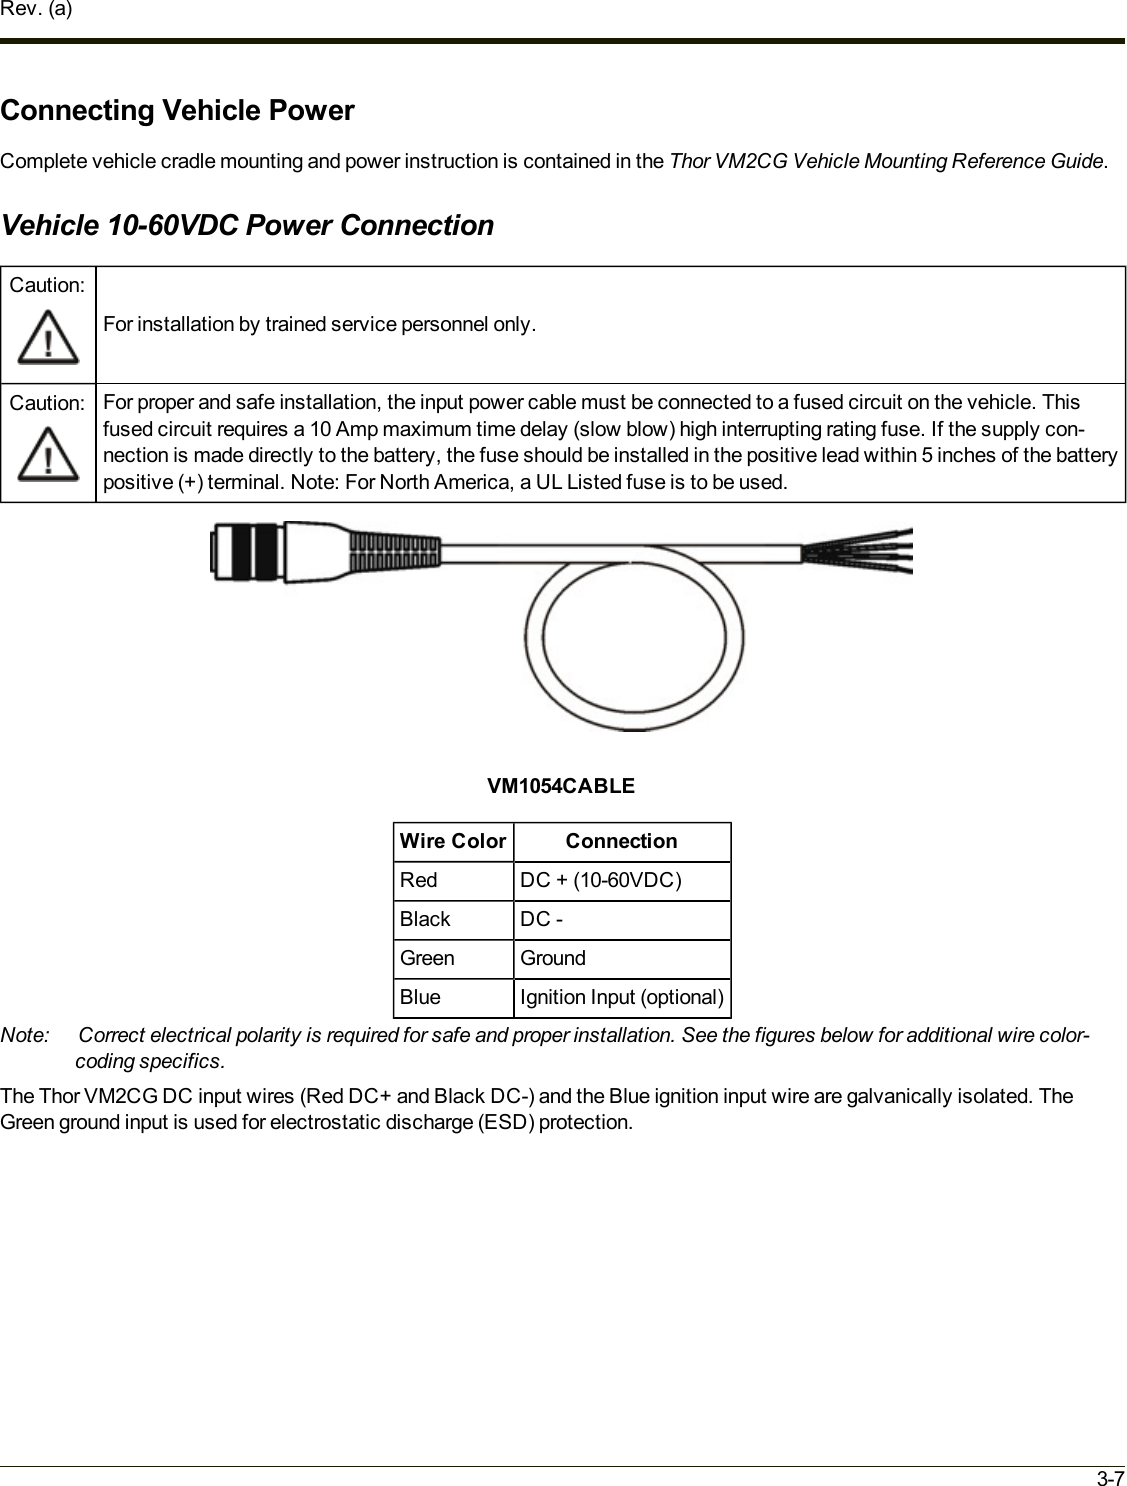 Rev. (a)Connecting Vehicle PowerComplete vehicle cradle mounting and power instruction is contained in the Thor VM2CG Vehicle Mounting Reference Guide.Vehicle 10-60VDC Power ConnectionCaution:For installation by trained service personnel only.Caution: For proper and safe installation, the input power cable must be connected to a fused circuit on the vehicle. Thisfused circuit requires a 10 Amp maximum time delay (slow blow) high interrupting rating fuse. If the supply con-nection is made directly to the battery, the fuse should be installed in the positive lead within 5 inches of the batterypositive (+) terminal. Note: For North America, a UL Listed fuse is to be used.VM1054CABLEWire Color ConnectionRed DC + (10-60VDC)Black DC -Green GroundBlue Ignition Input (optional)Note: Correct electrical polarity is required for safe and proper installation. See the figures below for additional wire color-coding specifics.The Thor VM2CG DC input wires (Red DC+ and Black DC-) and the Blue ignition input wire are galvanically isolated. TheGreen ground input is used for electrostatic discharge (ESD) protection.3-7